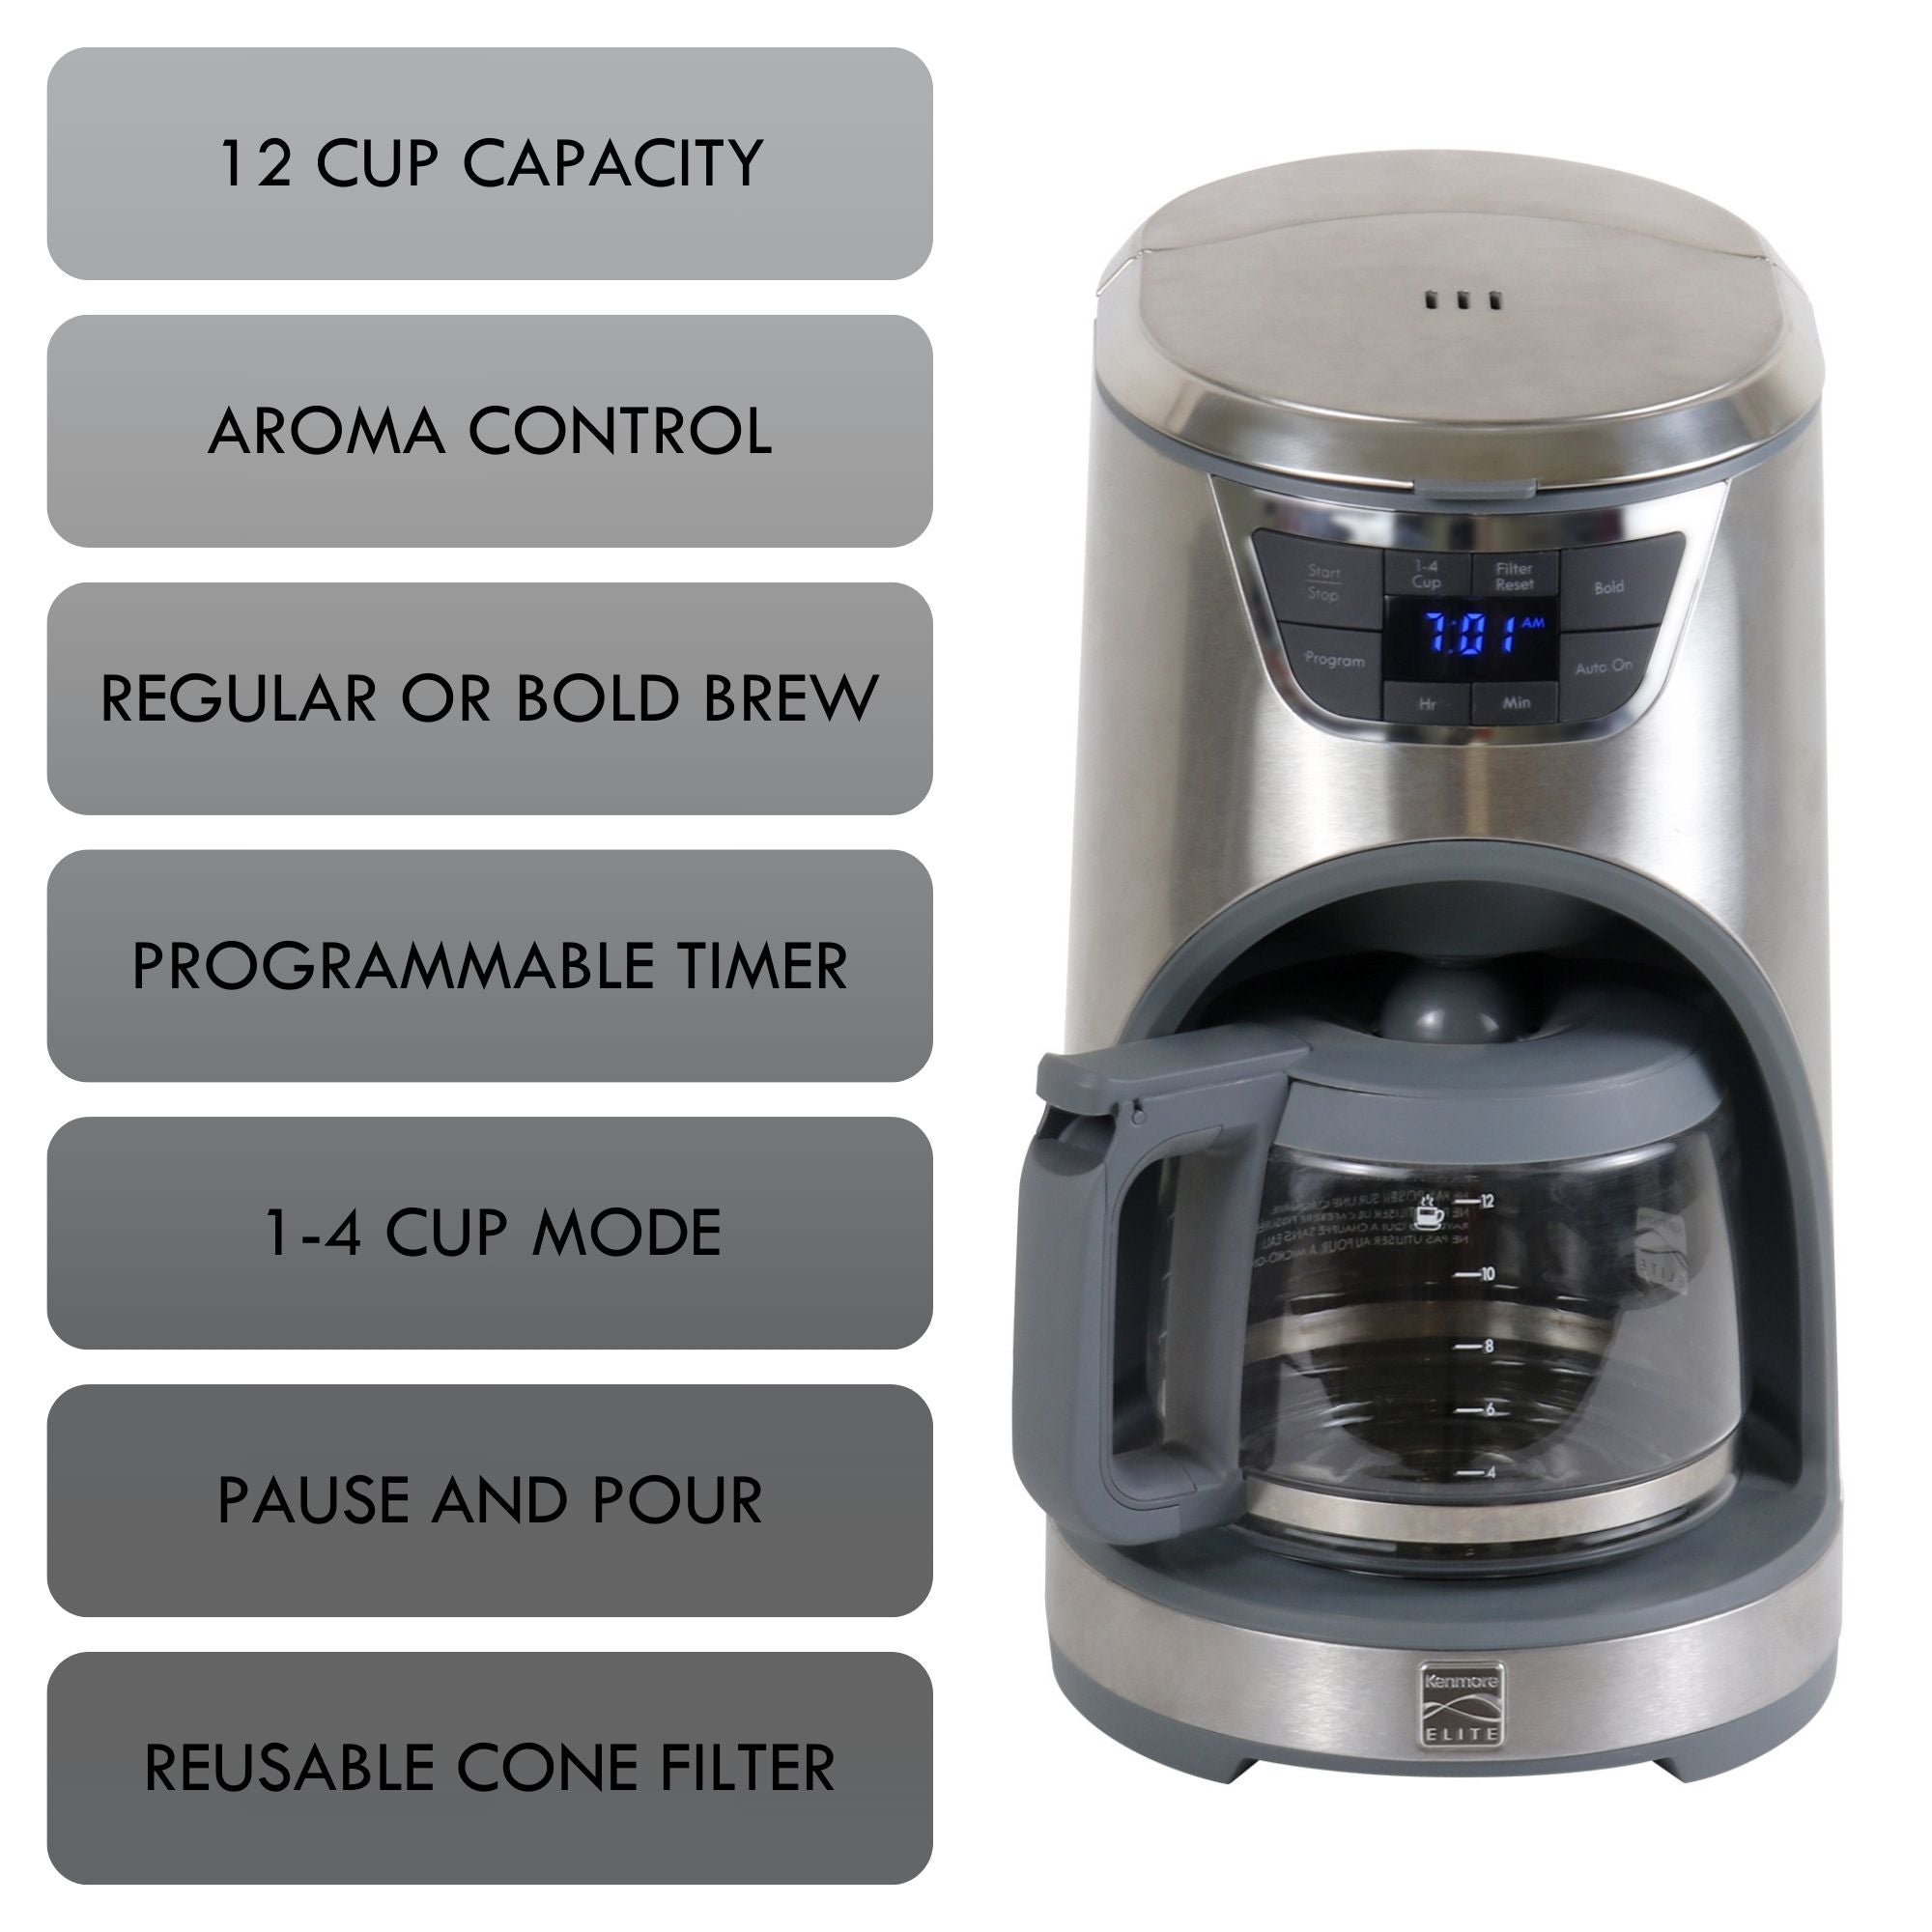 Kenmore Elite 12 cup programmable coffeemaker on a white background on the right with a list of features to the left: 12 cup capacity; aroma control; regular or bold brew; programmable timer; 1-4 cup mode; pause and pour; reusable cone filter